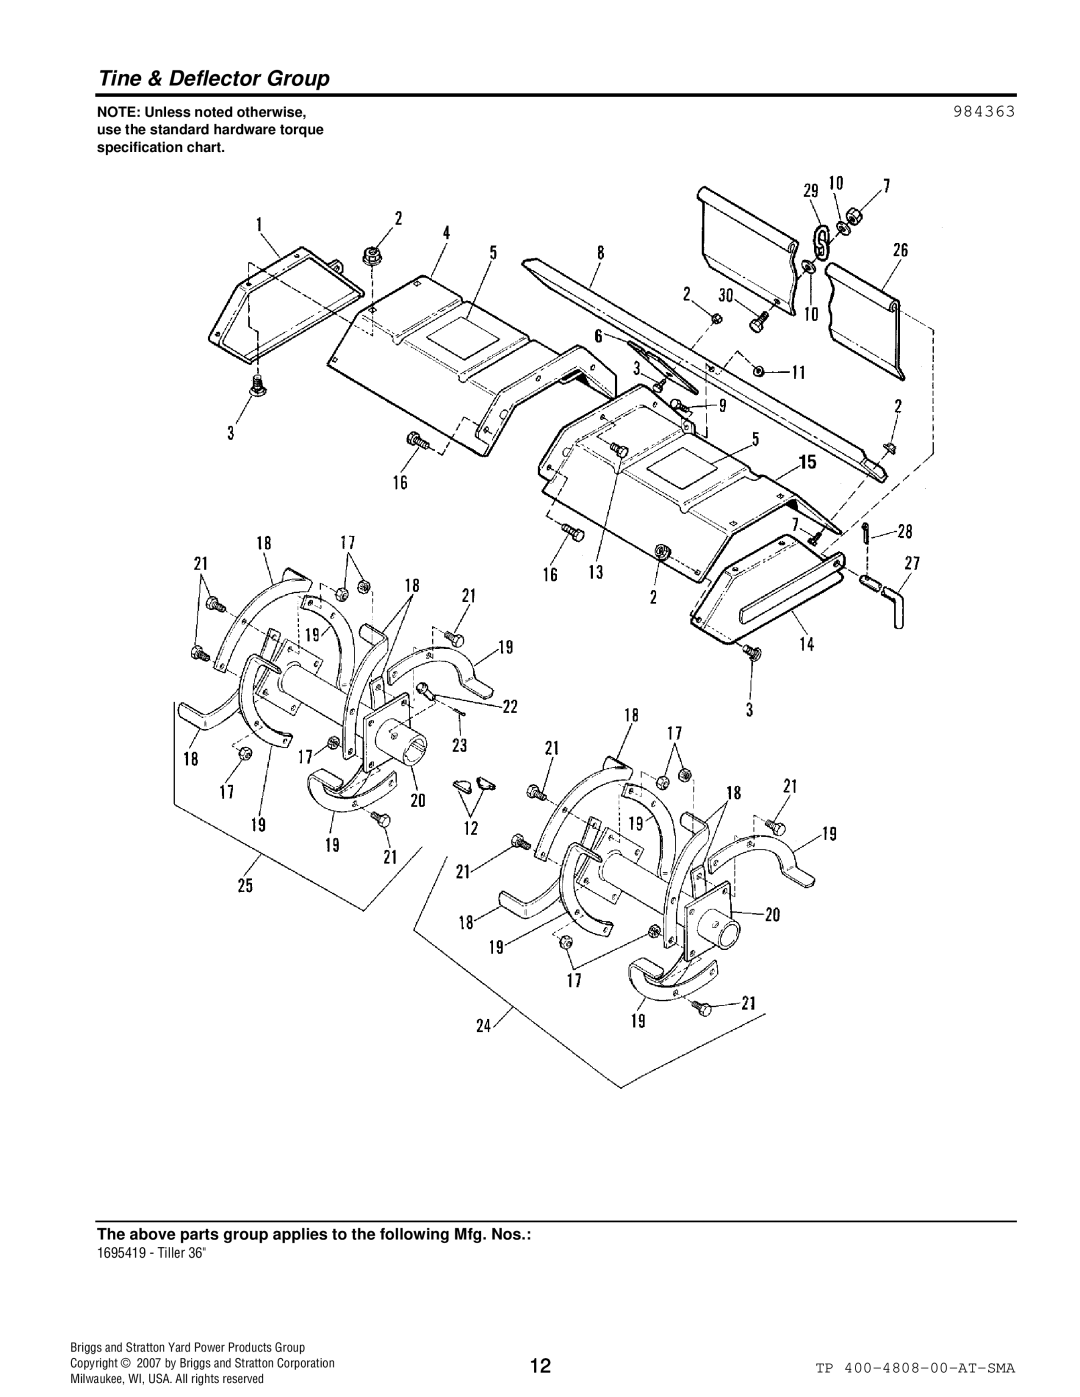 Snapper 4808 Tine & Deflector Group, 984363, NOTE Unless noted otherwise, Briggs and Stratton Yard Power Products Group 